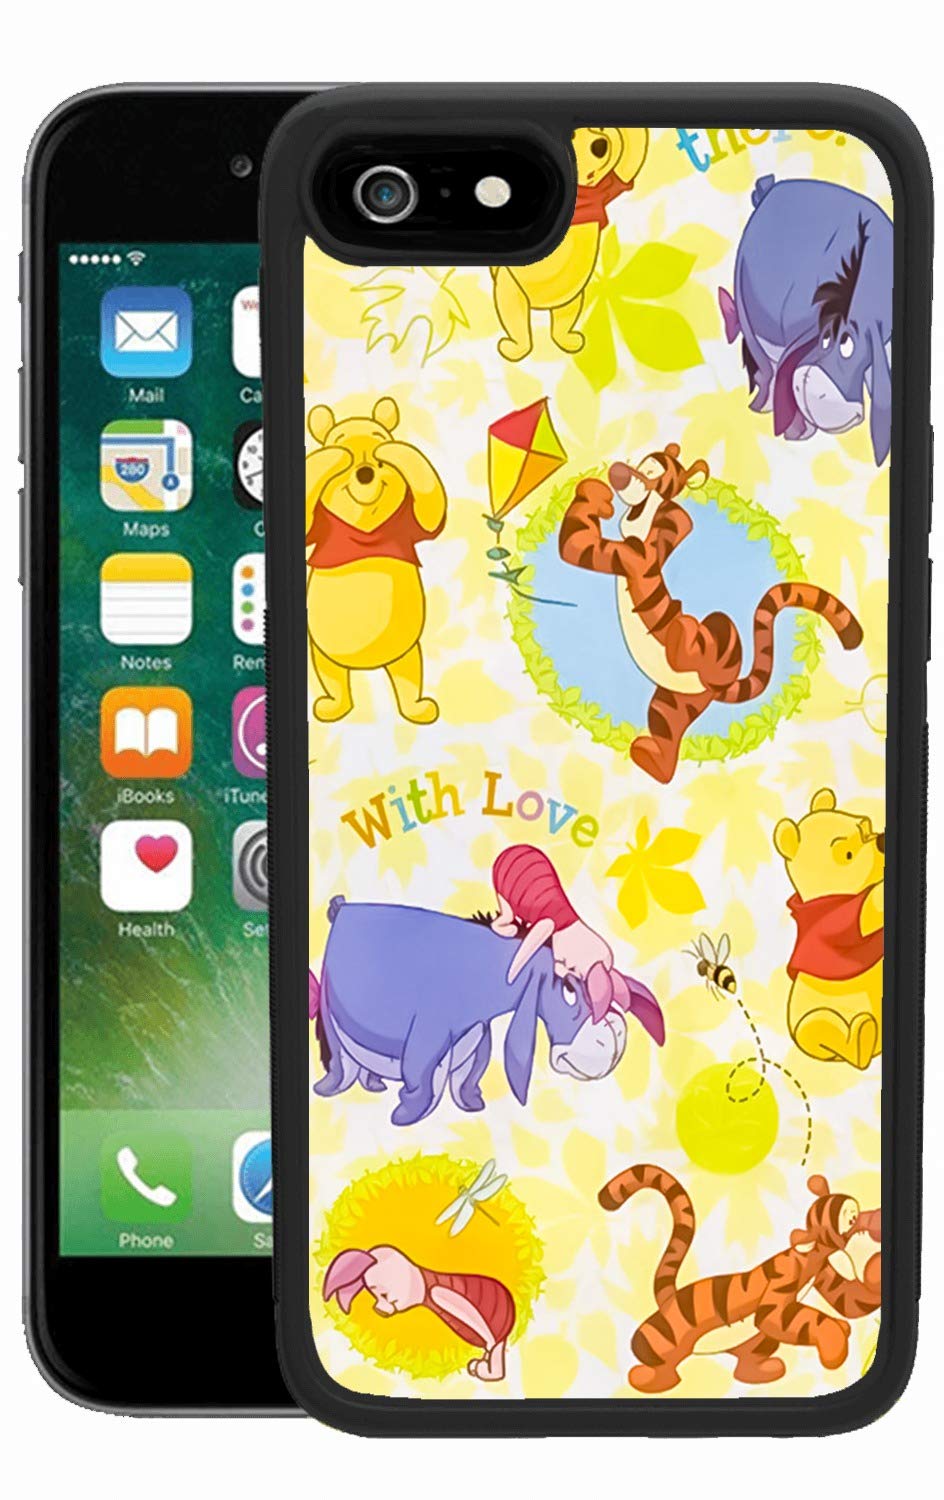 Disneyhome Winnie Pooh Wallpaper Design For Iphone - Boys Iphone 6 Case Football , HD Wallpaper & Backgrounds